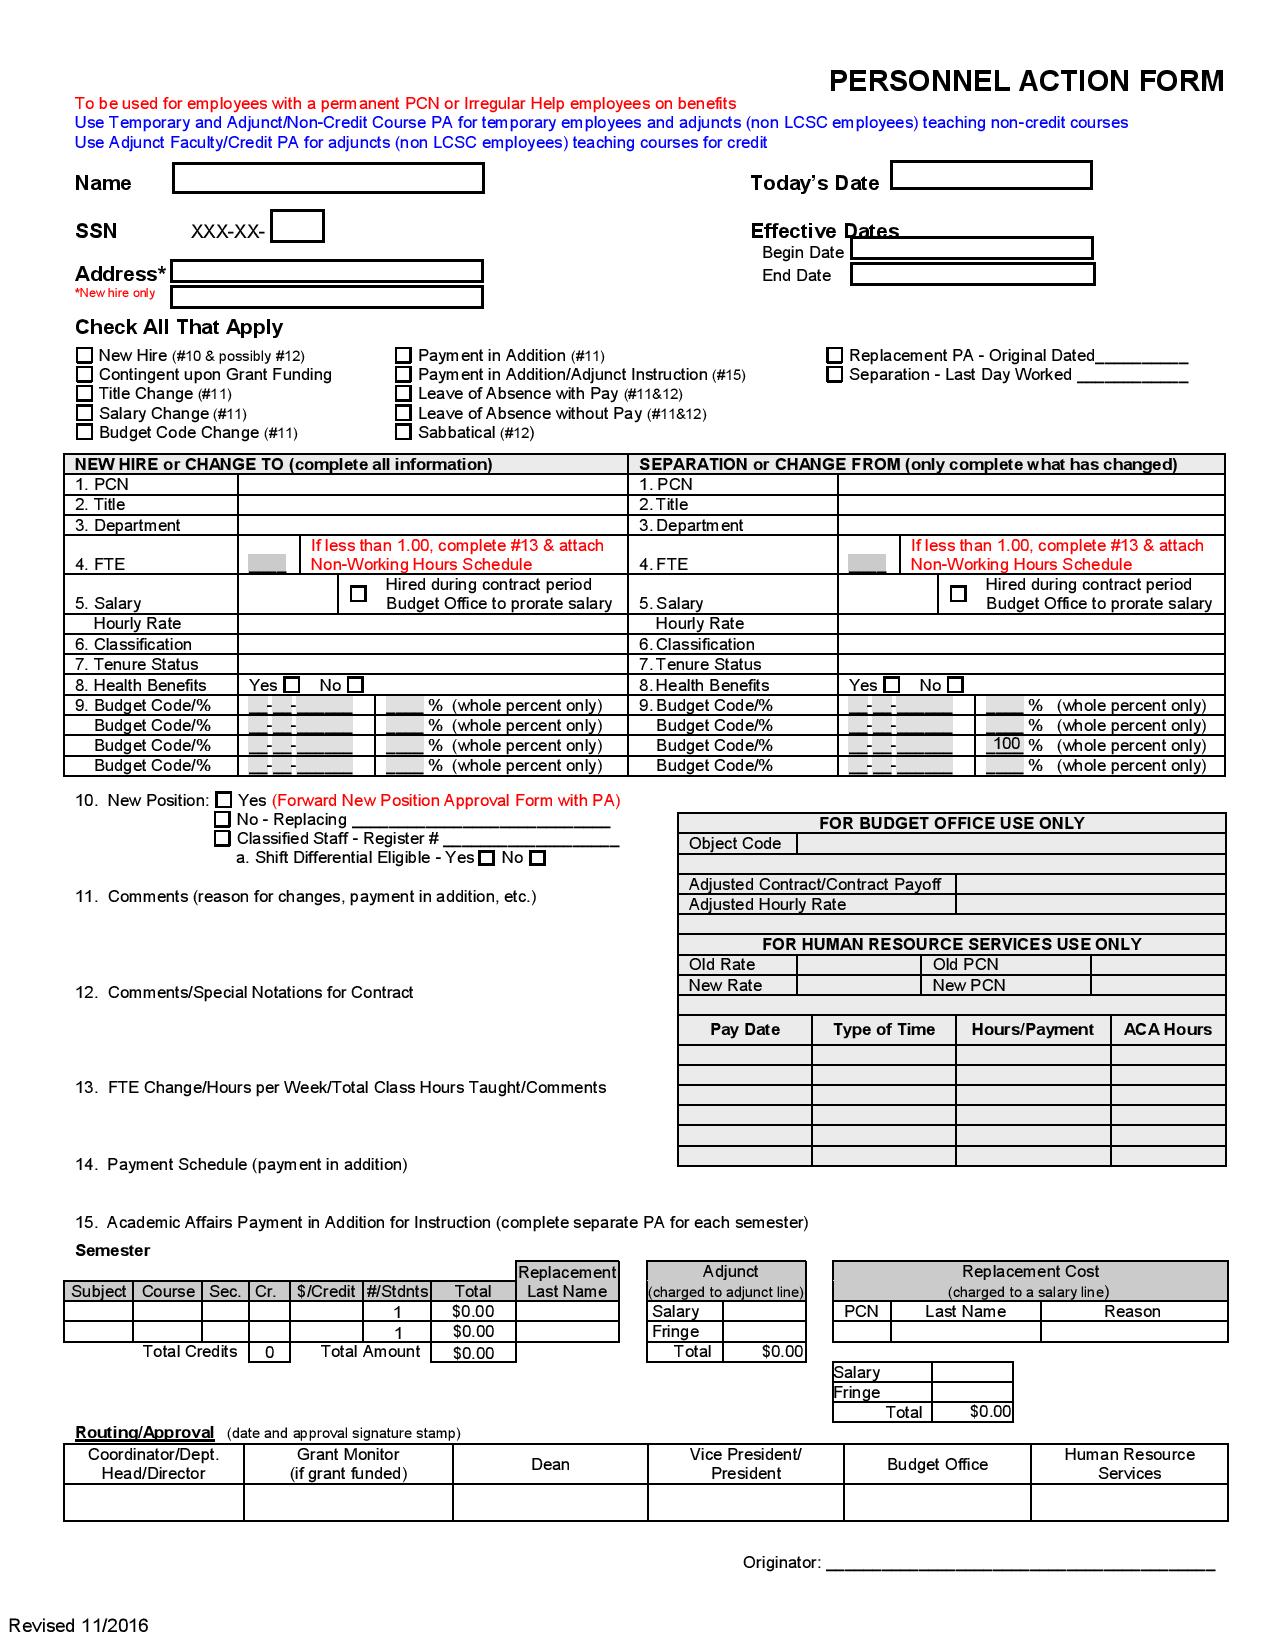 personnel action form sample page 001